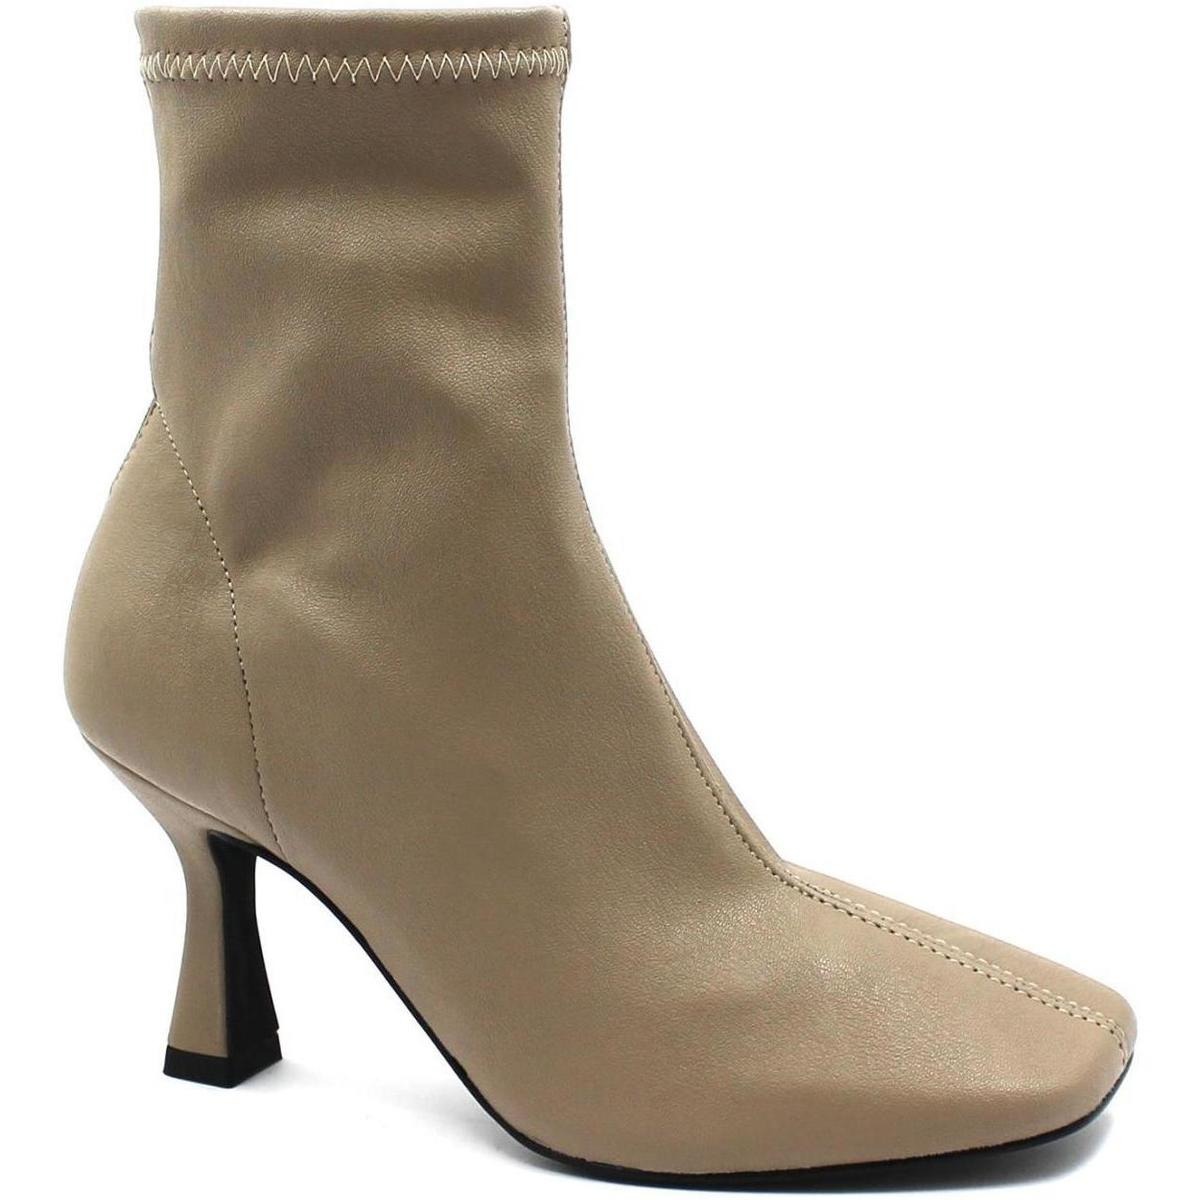 Nacree - Lady Ankle Boots Beige at Spartoo GOOFASH